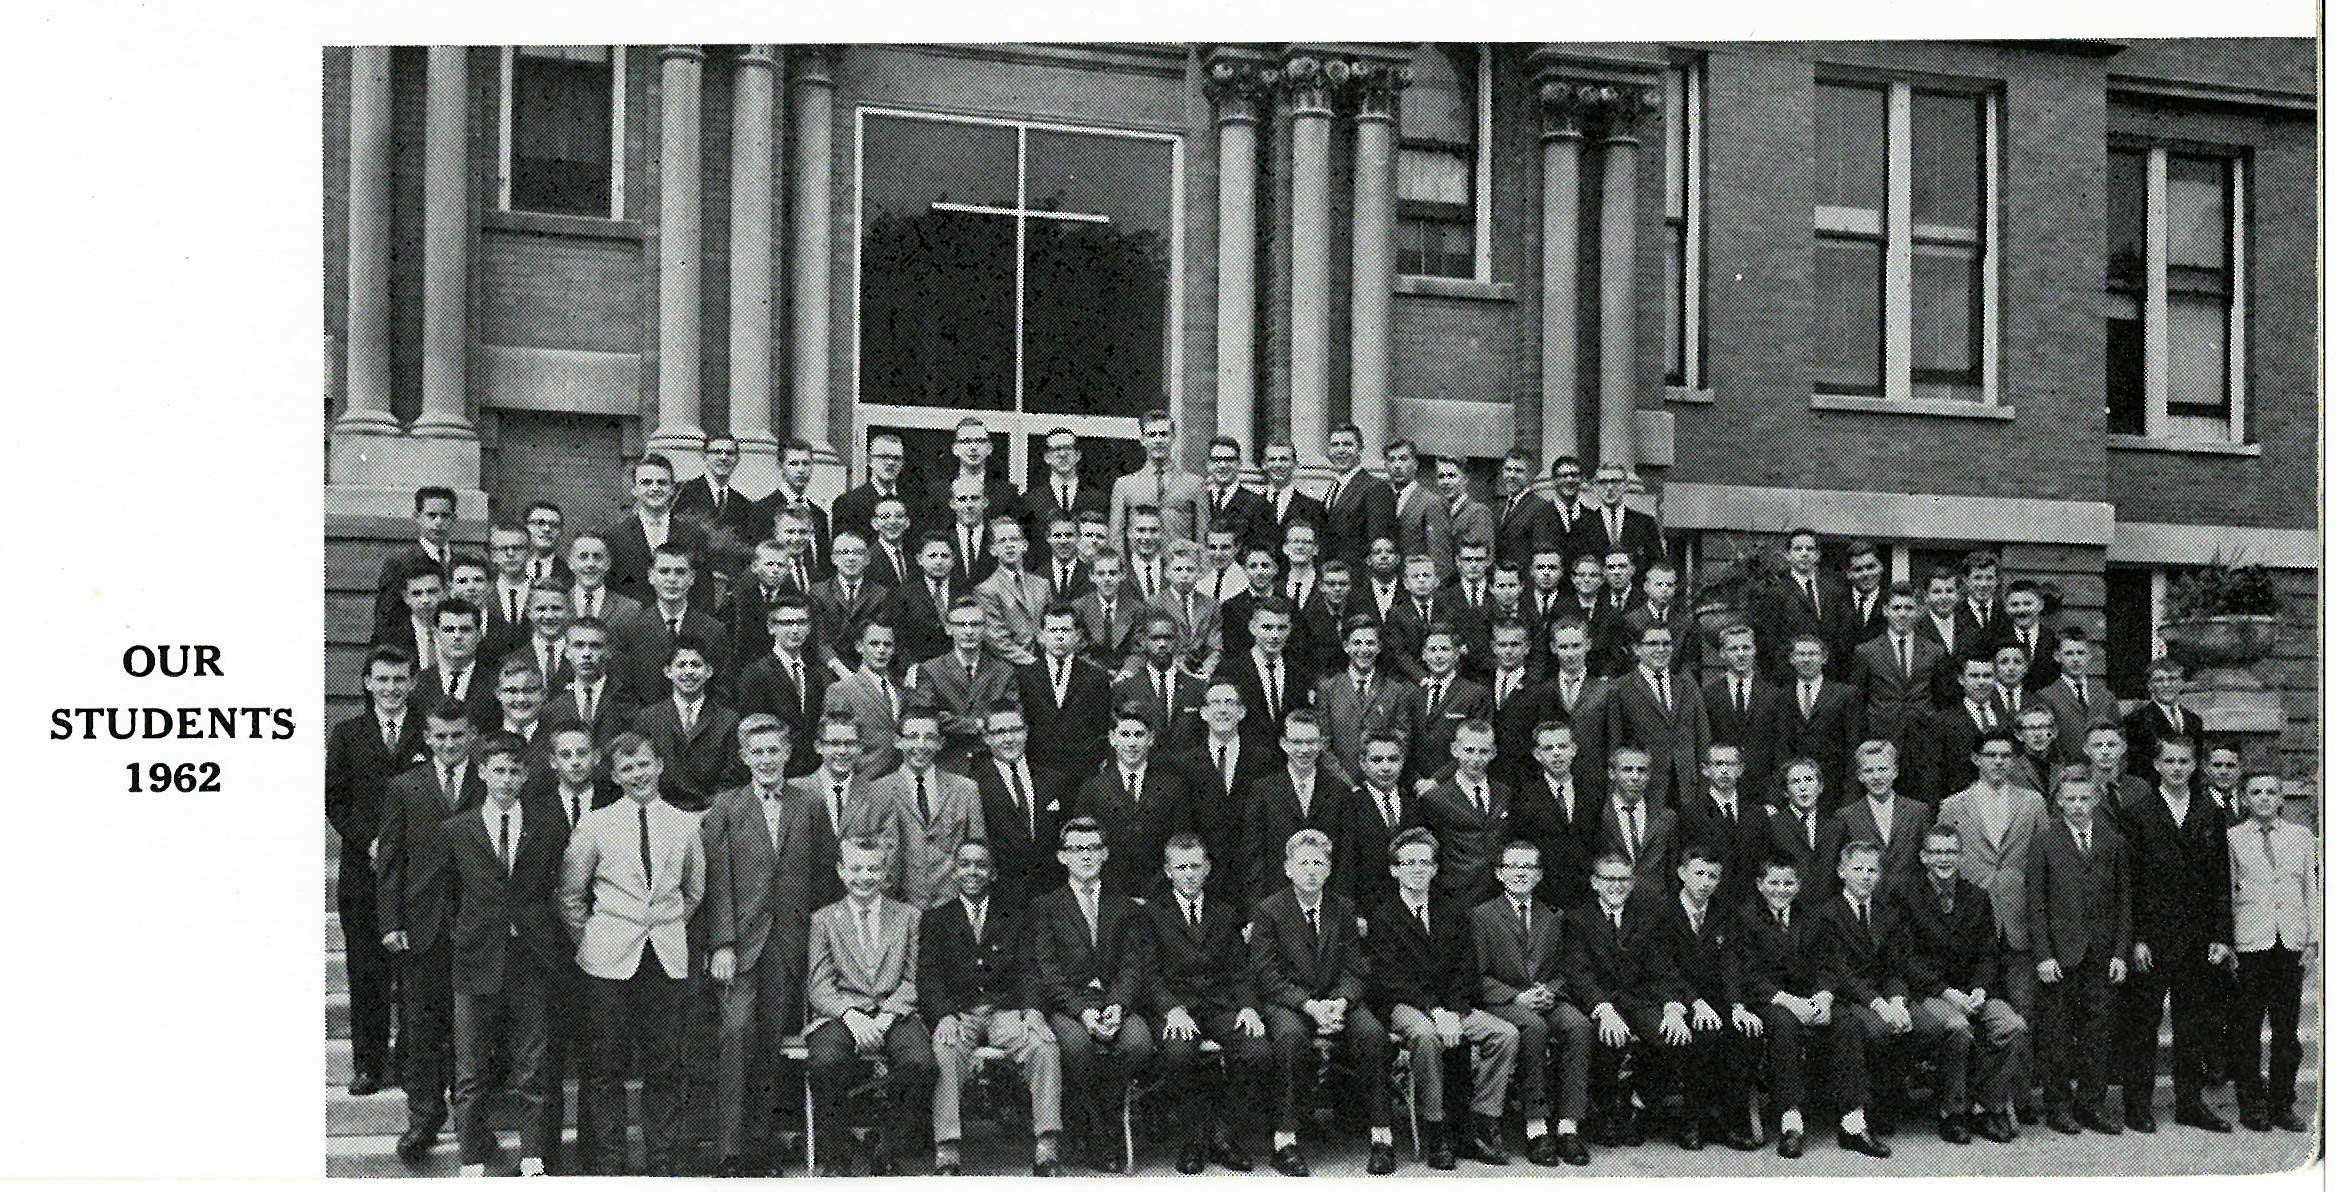 1962 student body from Divine Word Seminary, Girard, Penn. posing for a group photo.